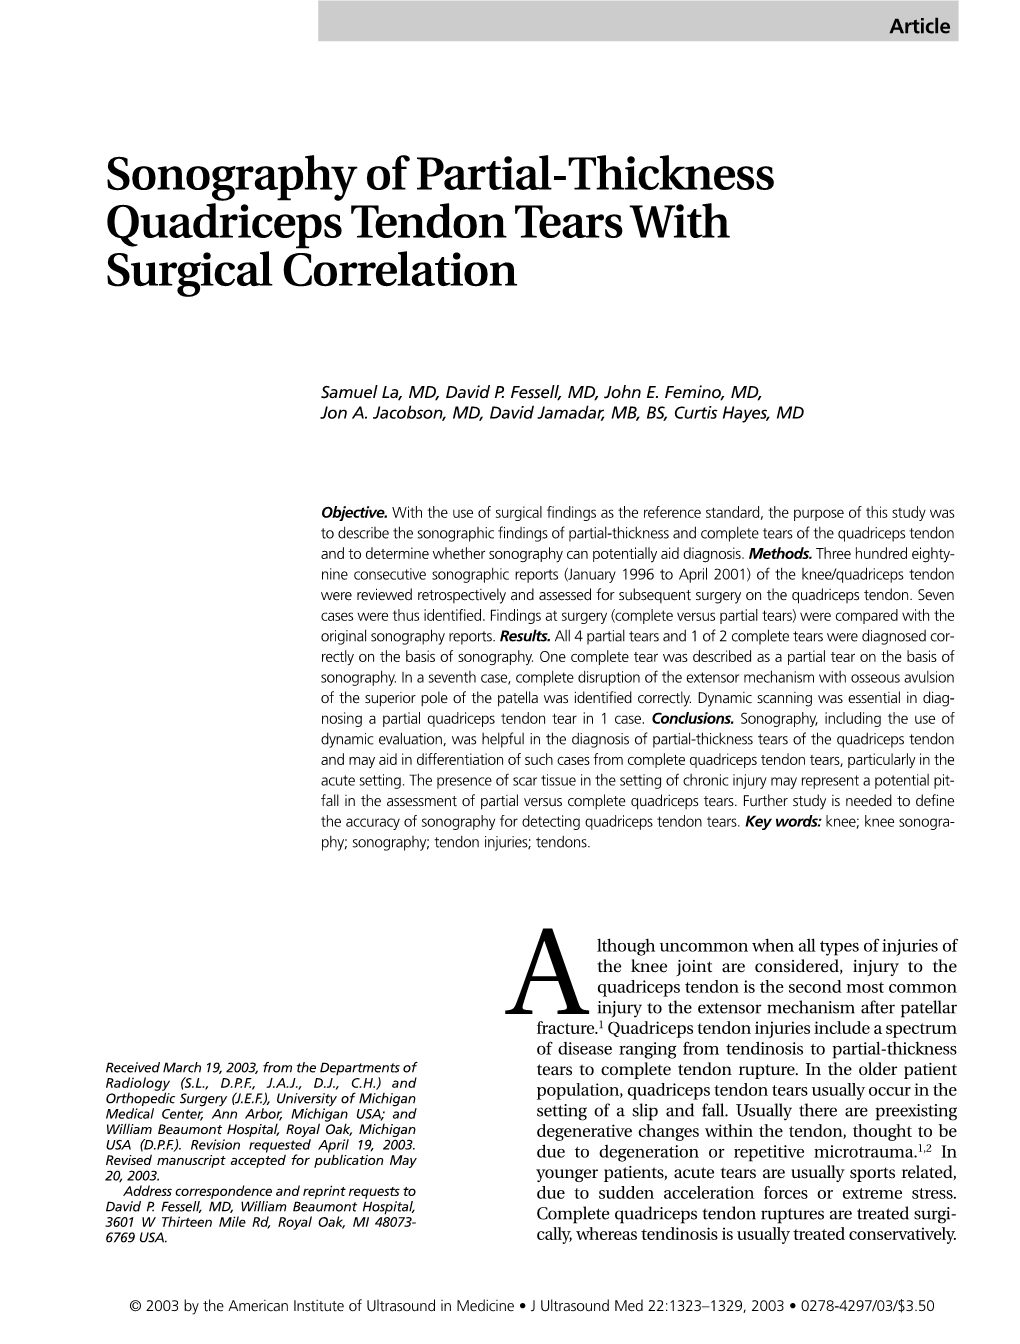 Sonography of Partial-Thickness Quadriceps Tendon Tears with Surgical Correlation